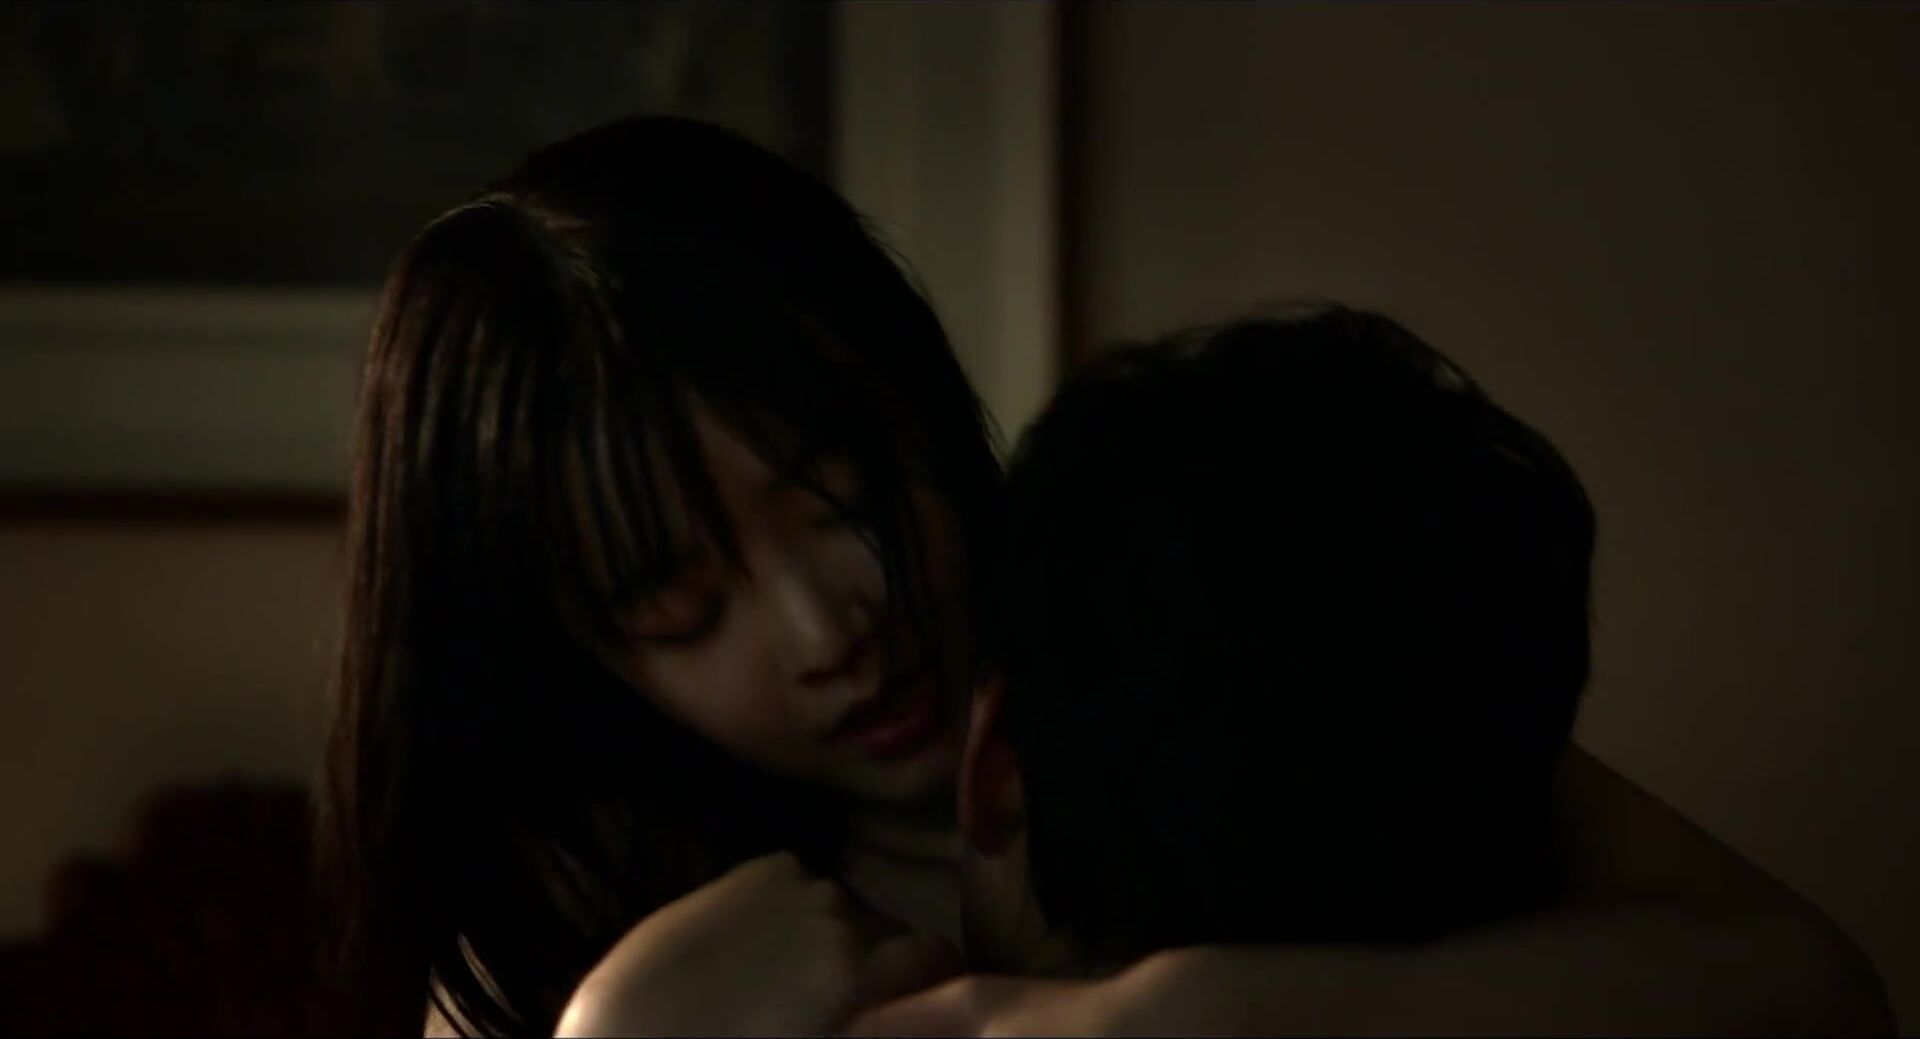 Pain Bae Seul Gi lives isolated with old man but still she wants sex with the young lover Wav - 1